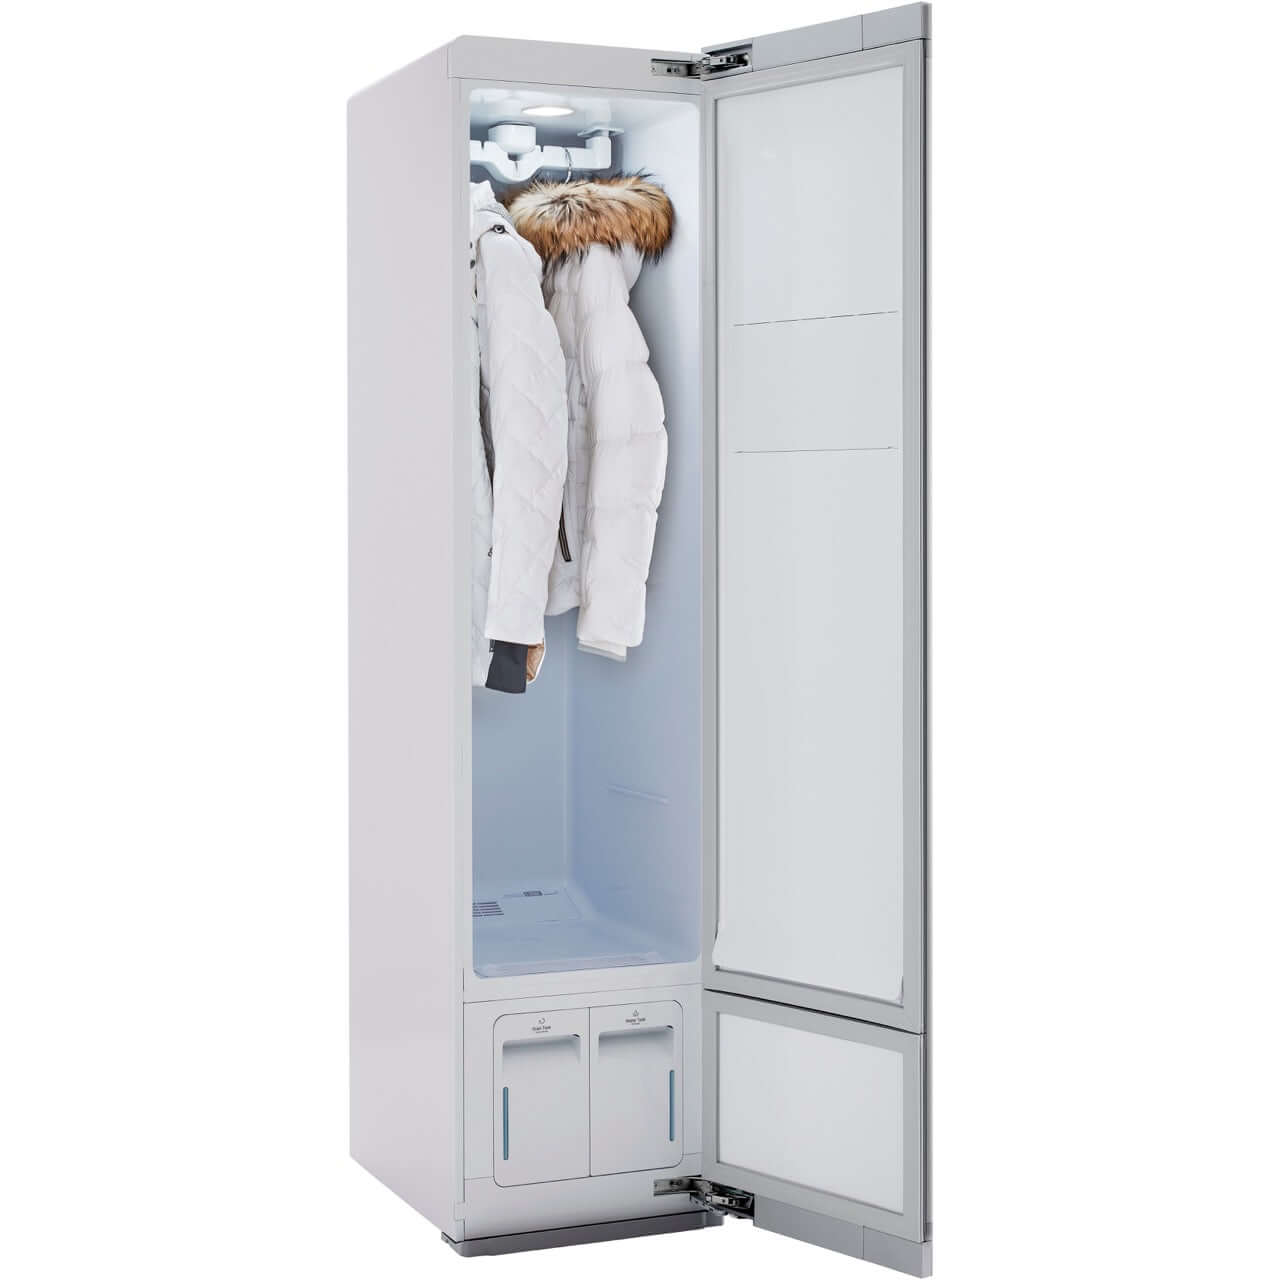 LG Styler Smart Wi-Fi Enabled Steam Closet with TrueSteam Technology and Exclusive Moving Hangers (S3CW)